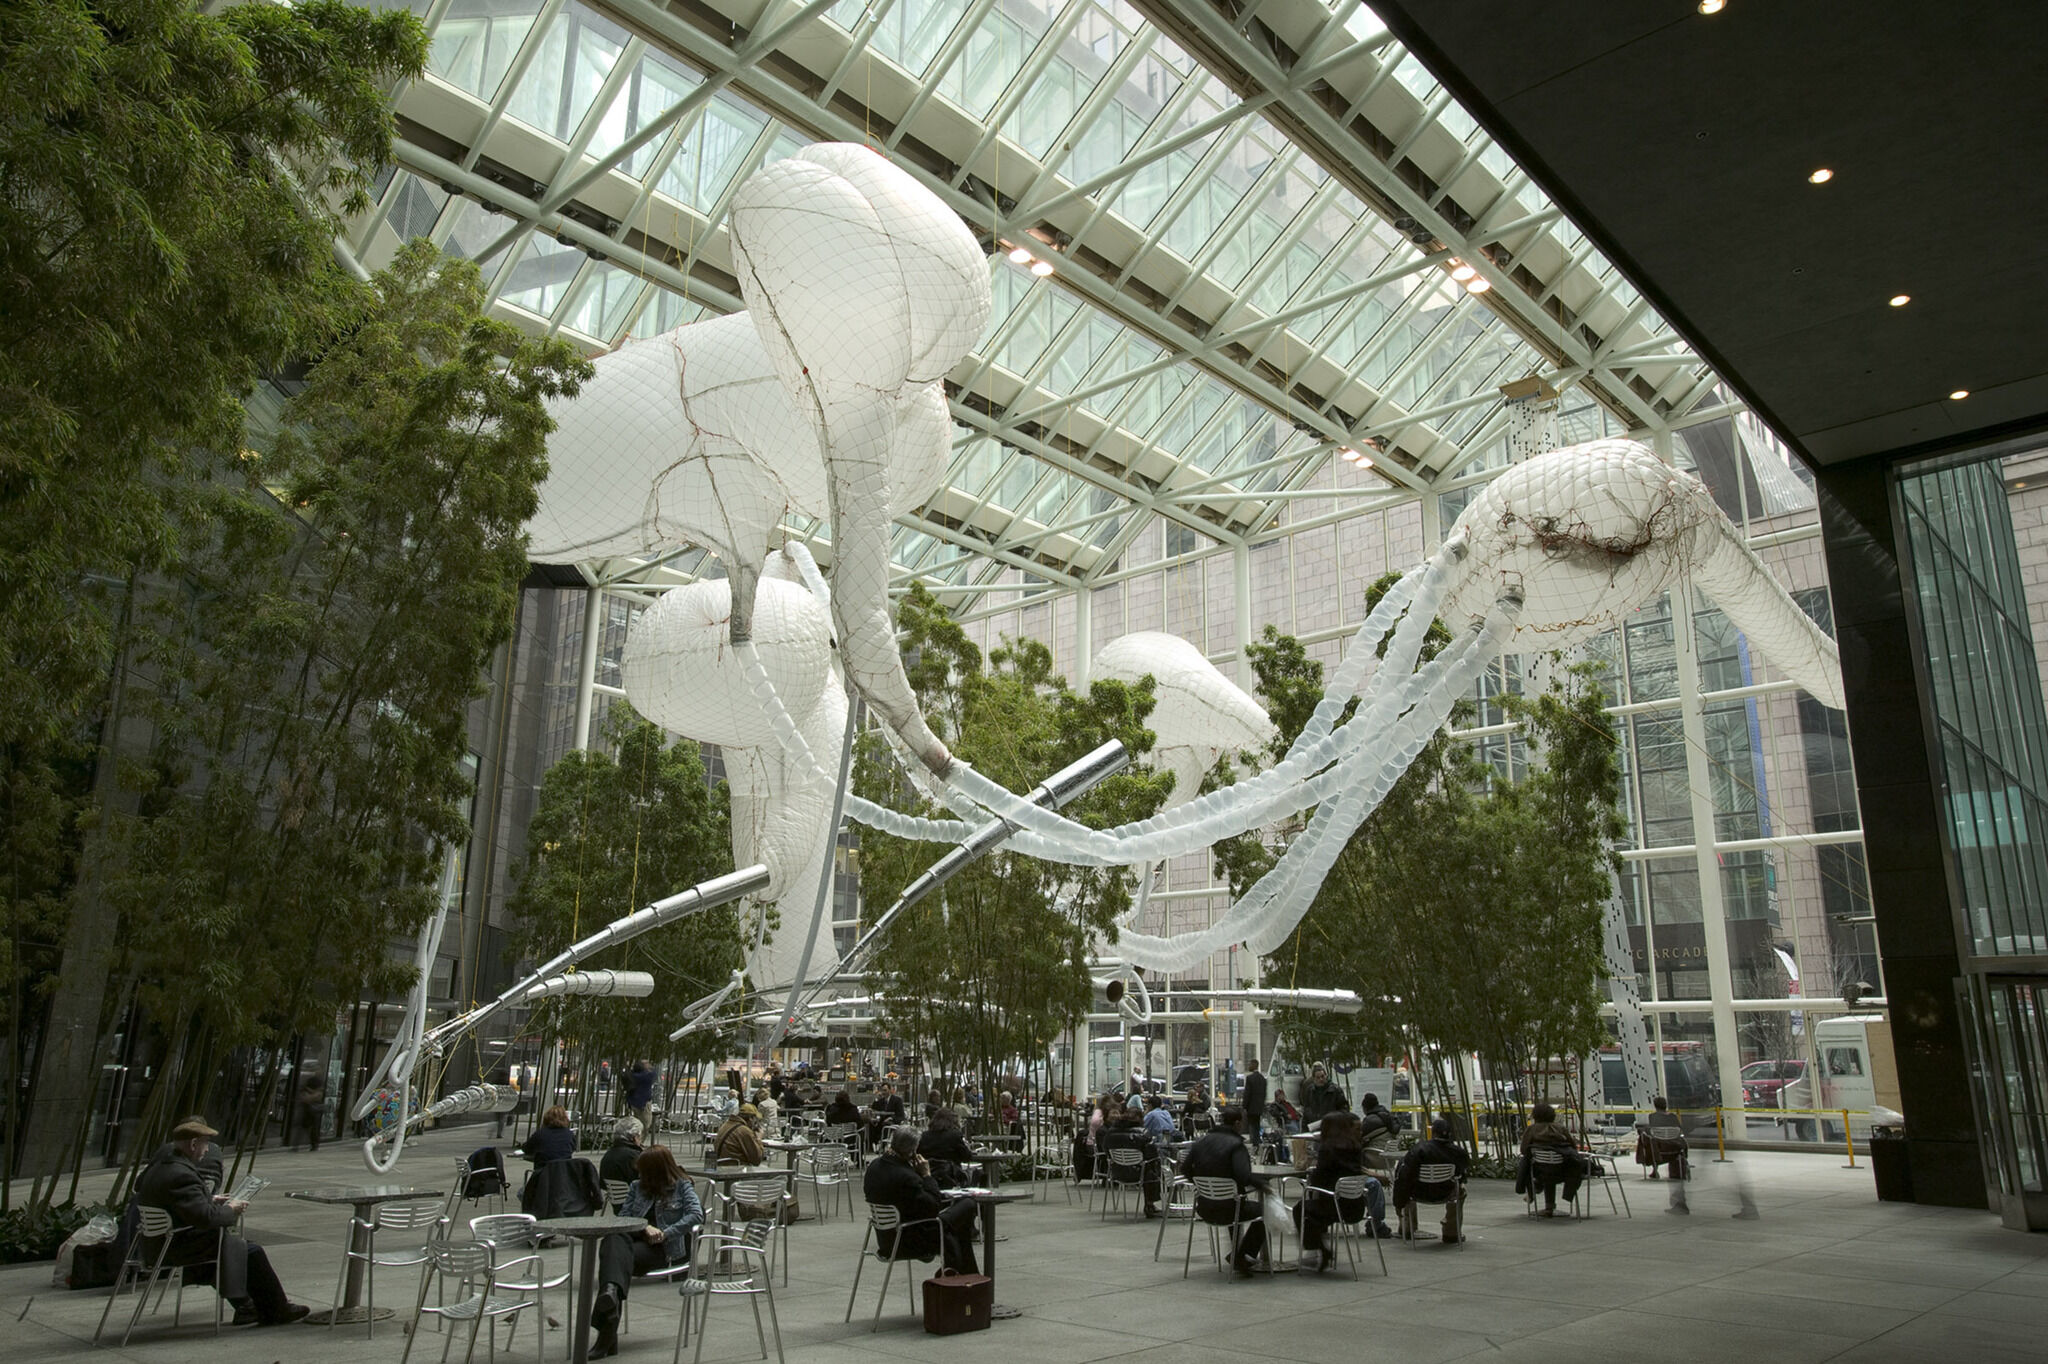 A large white sculpture displayed above people alongside trees.